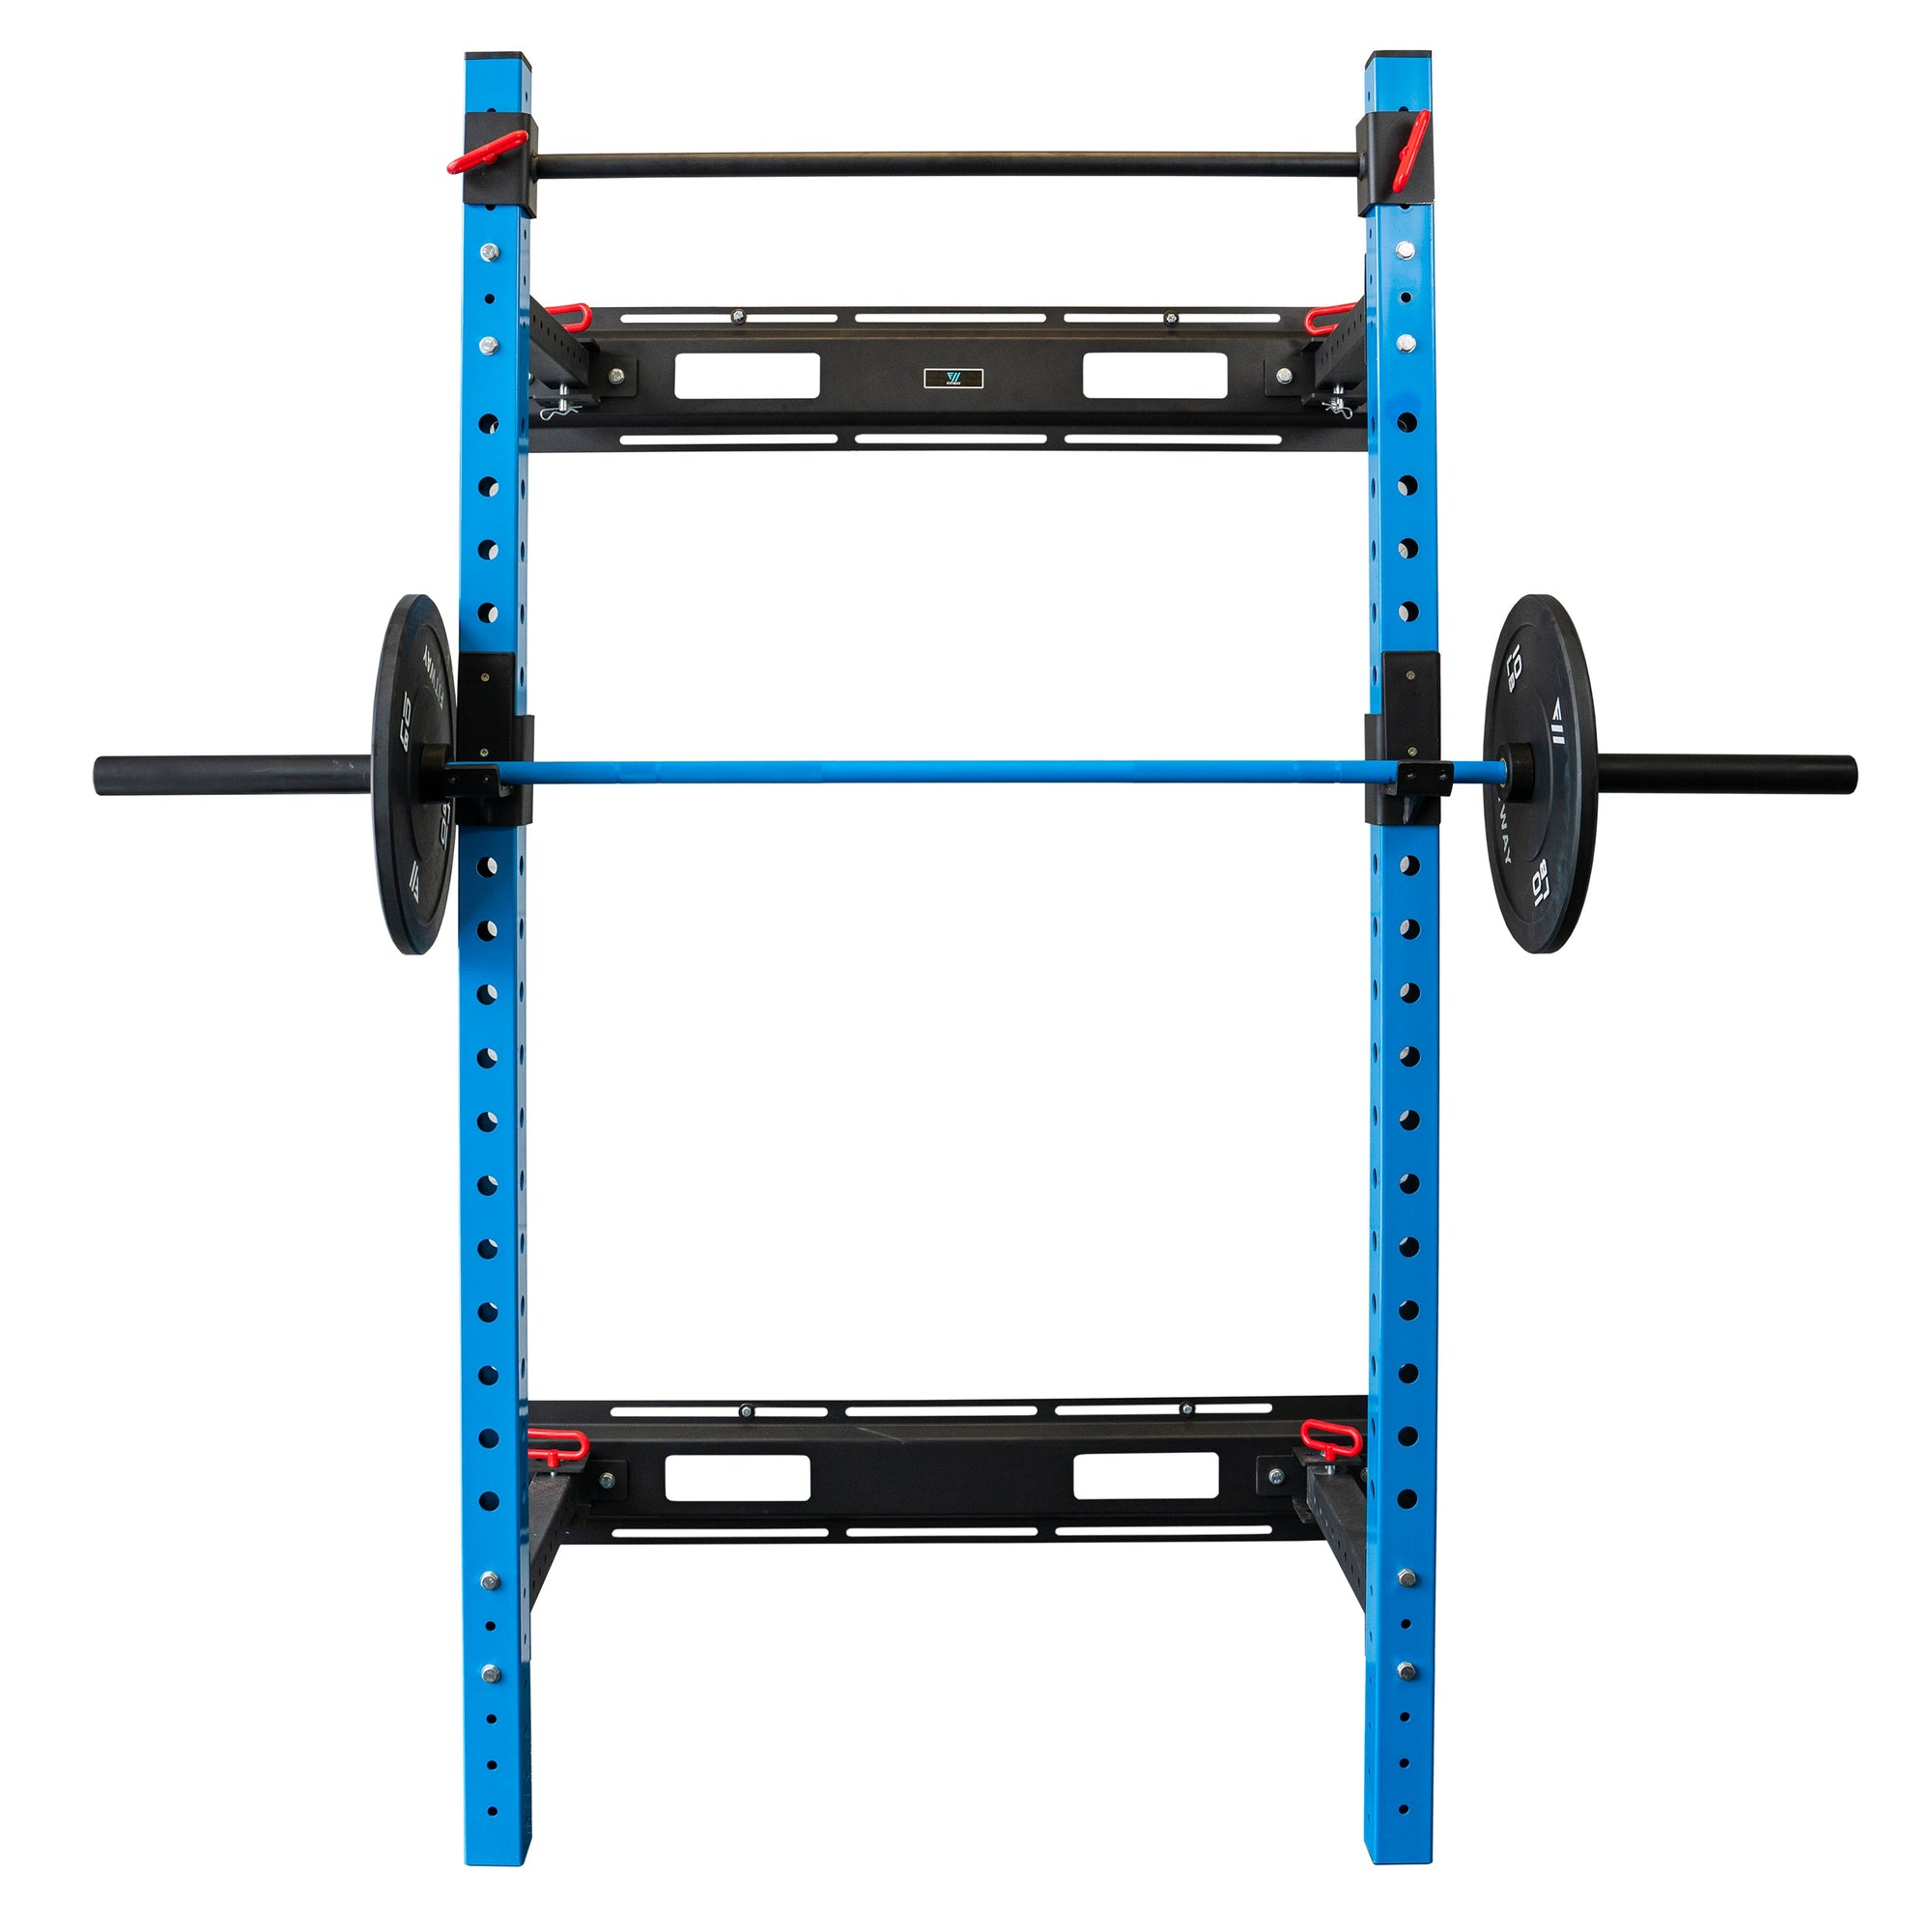 FitWay Equip. Folding Wall Rack 